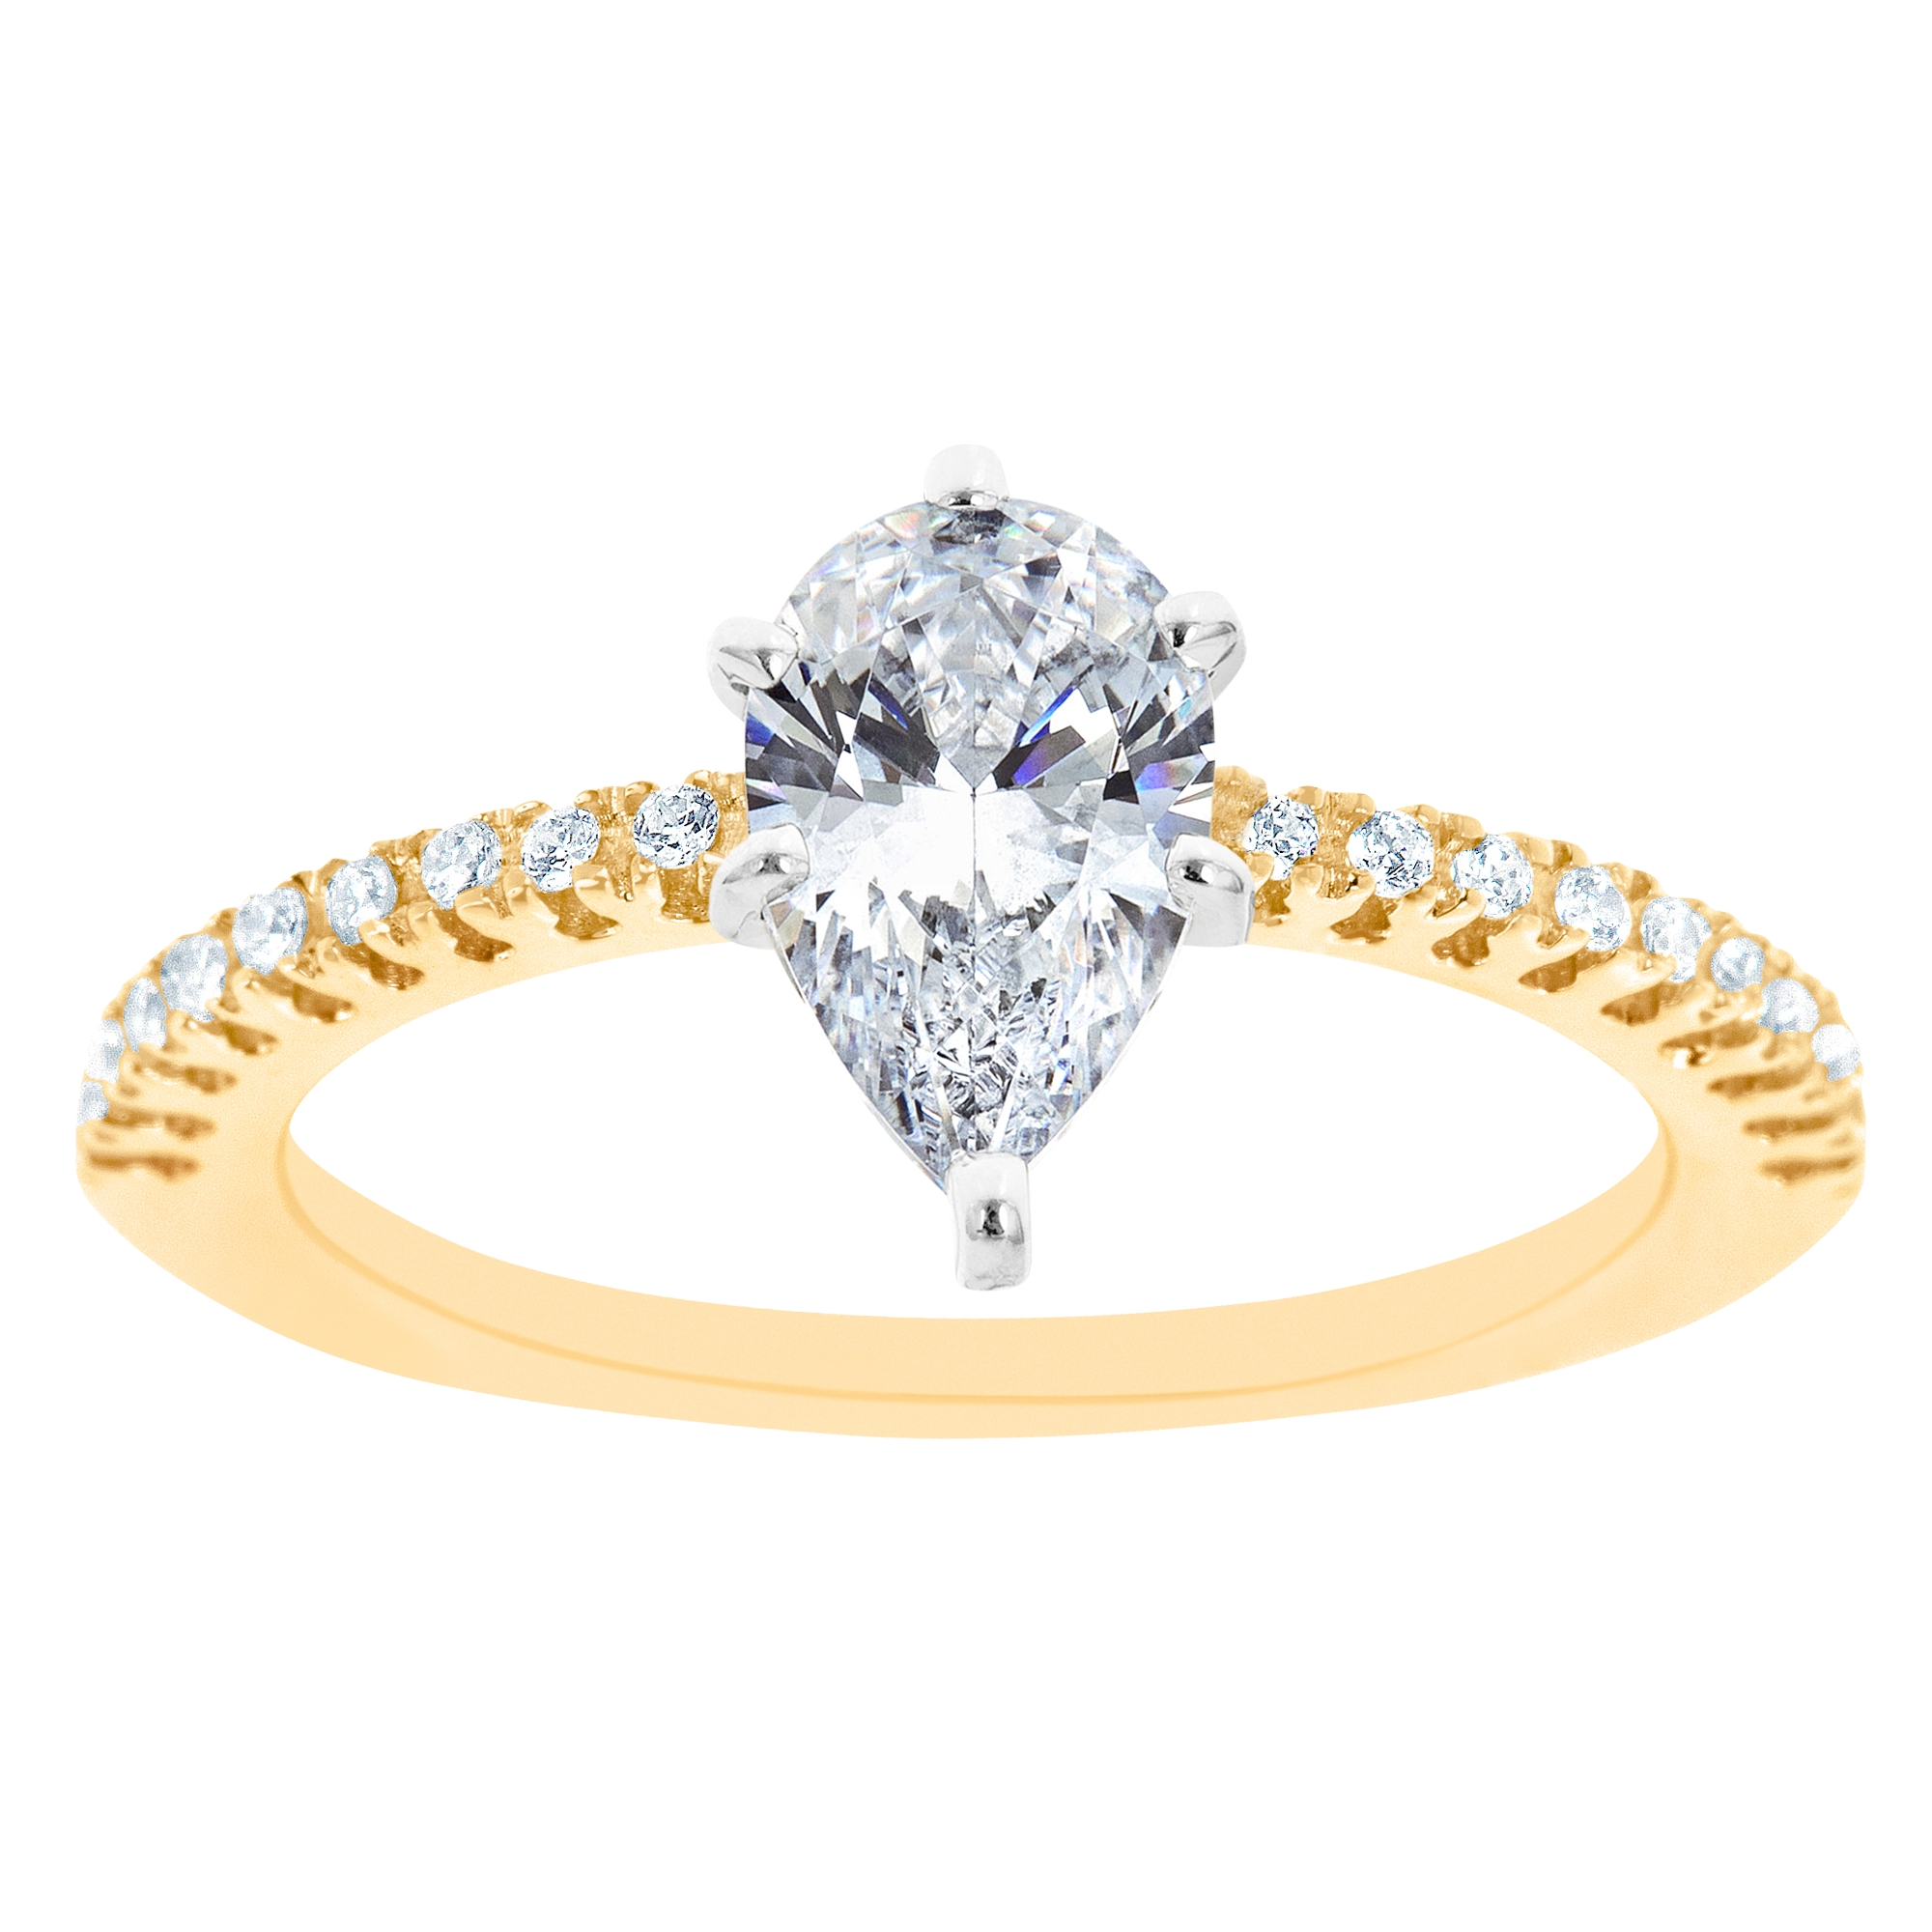 New York City Diamond District 14K Two Tone Pear Shaped Certified Diamond Engagement Ring